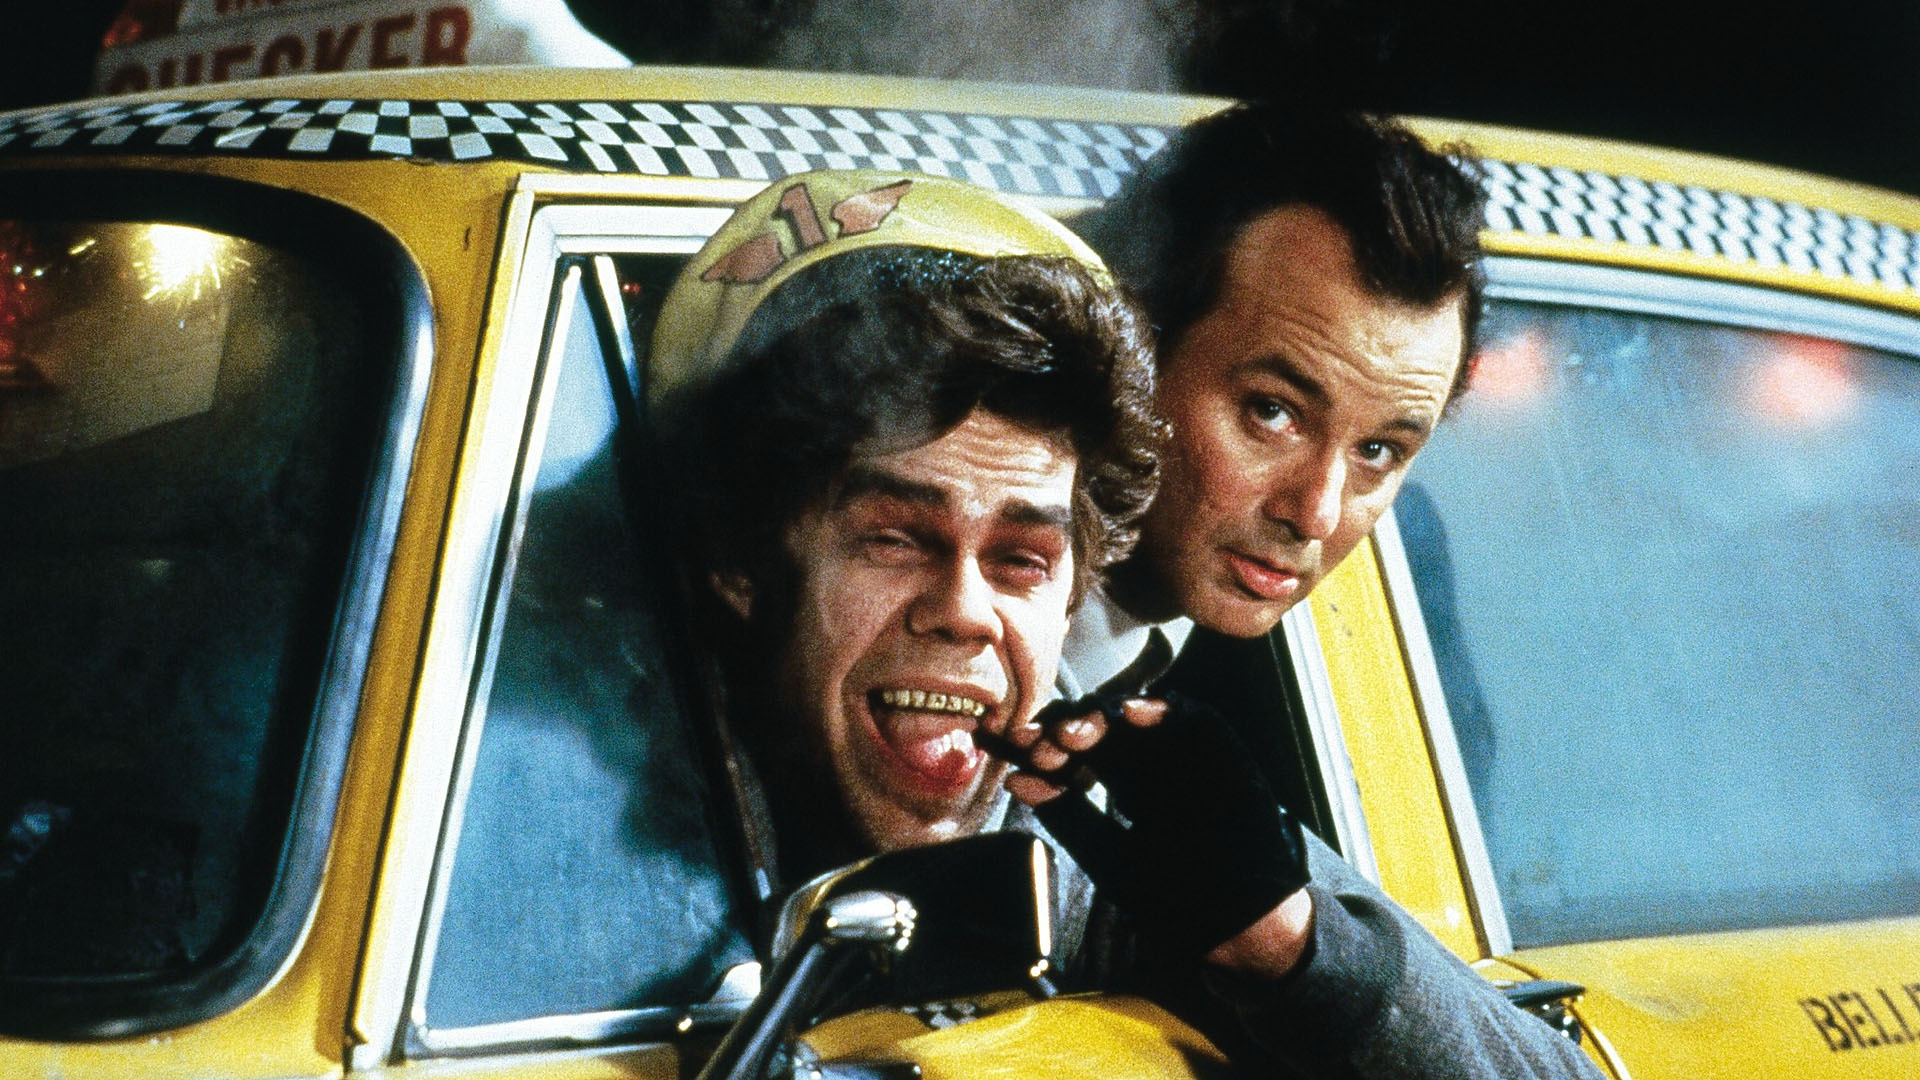 scrooged, Comedy, Christmas, Ew Wallpaper